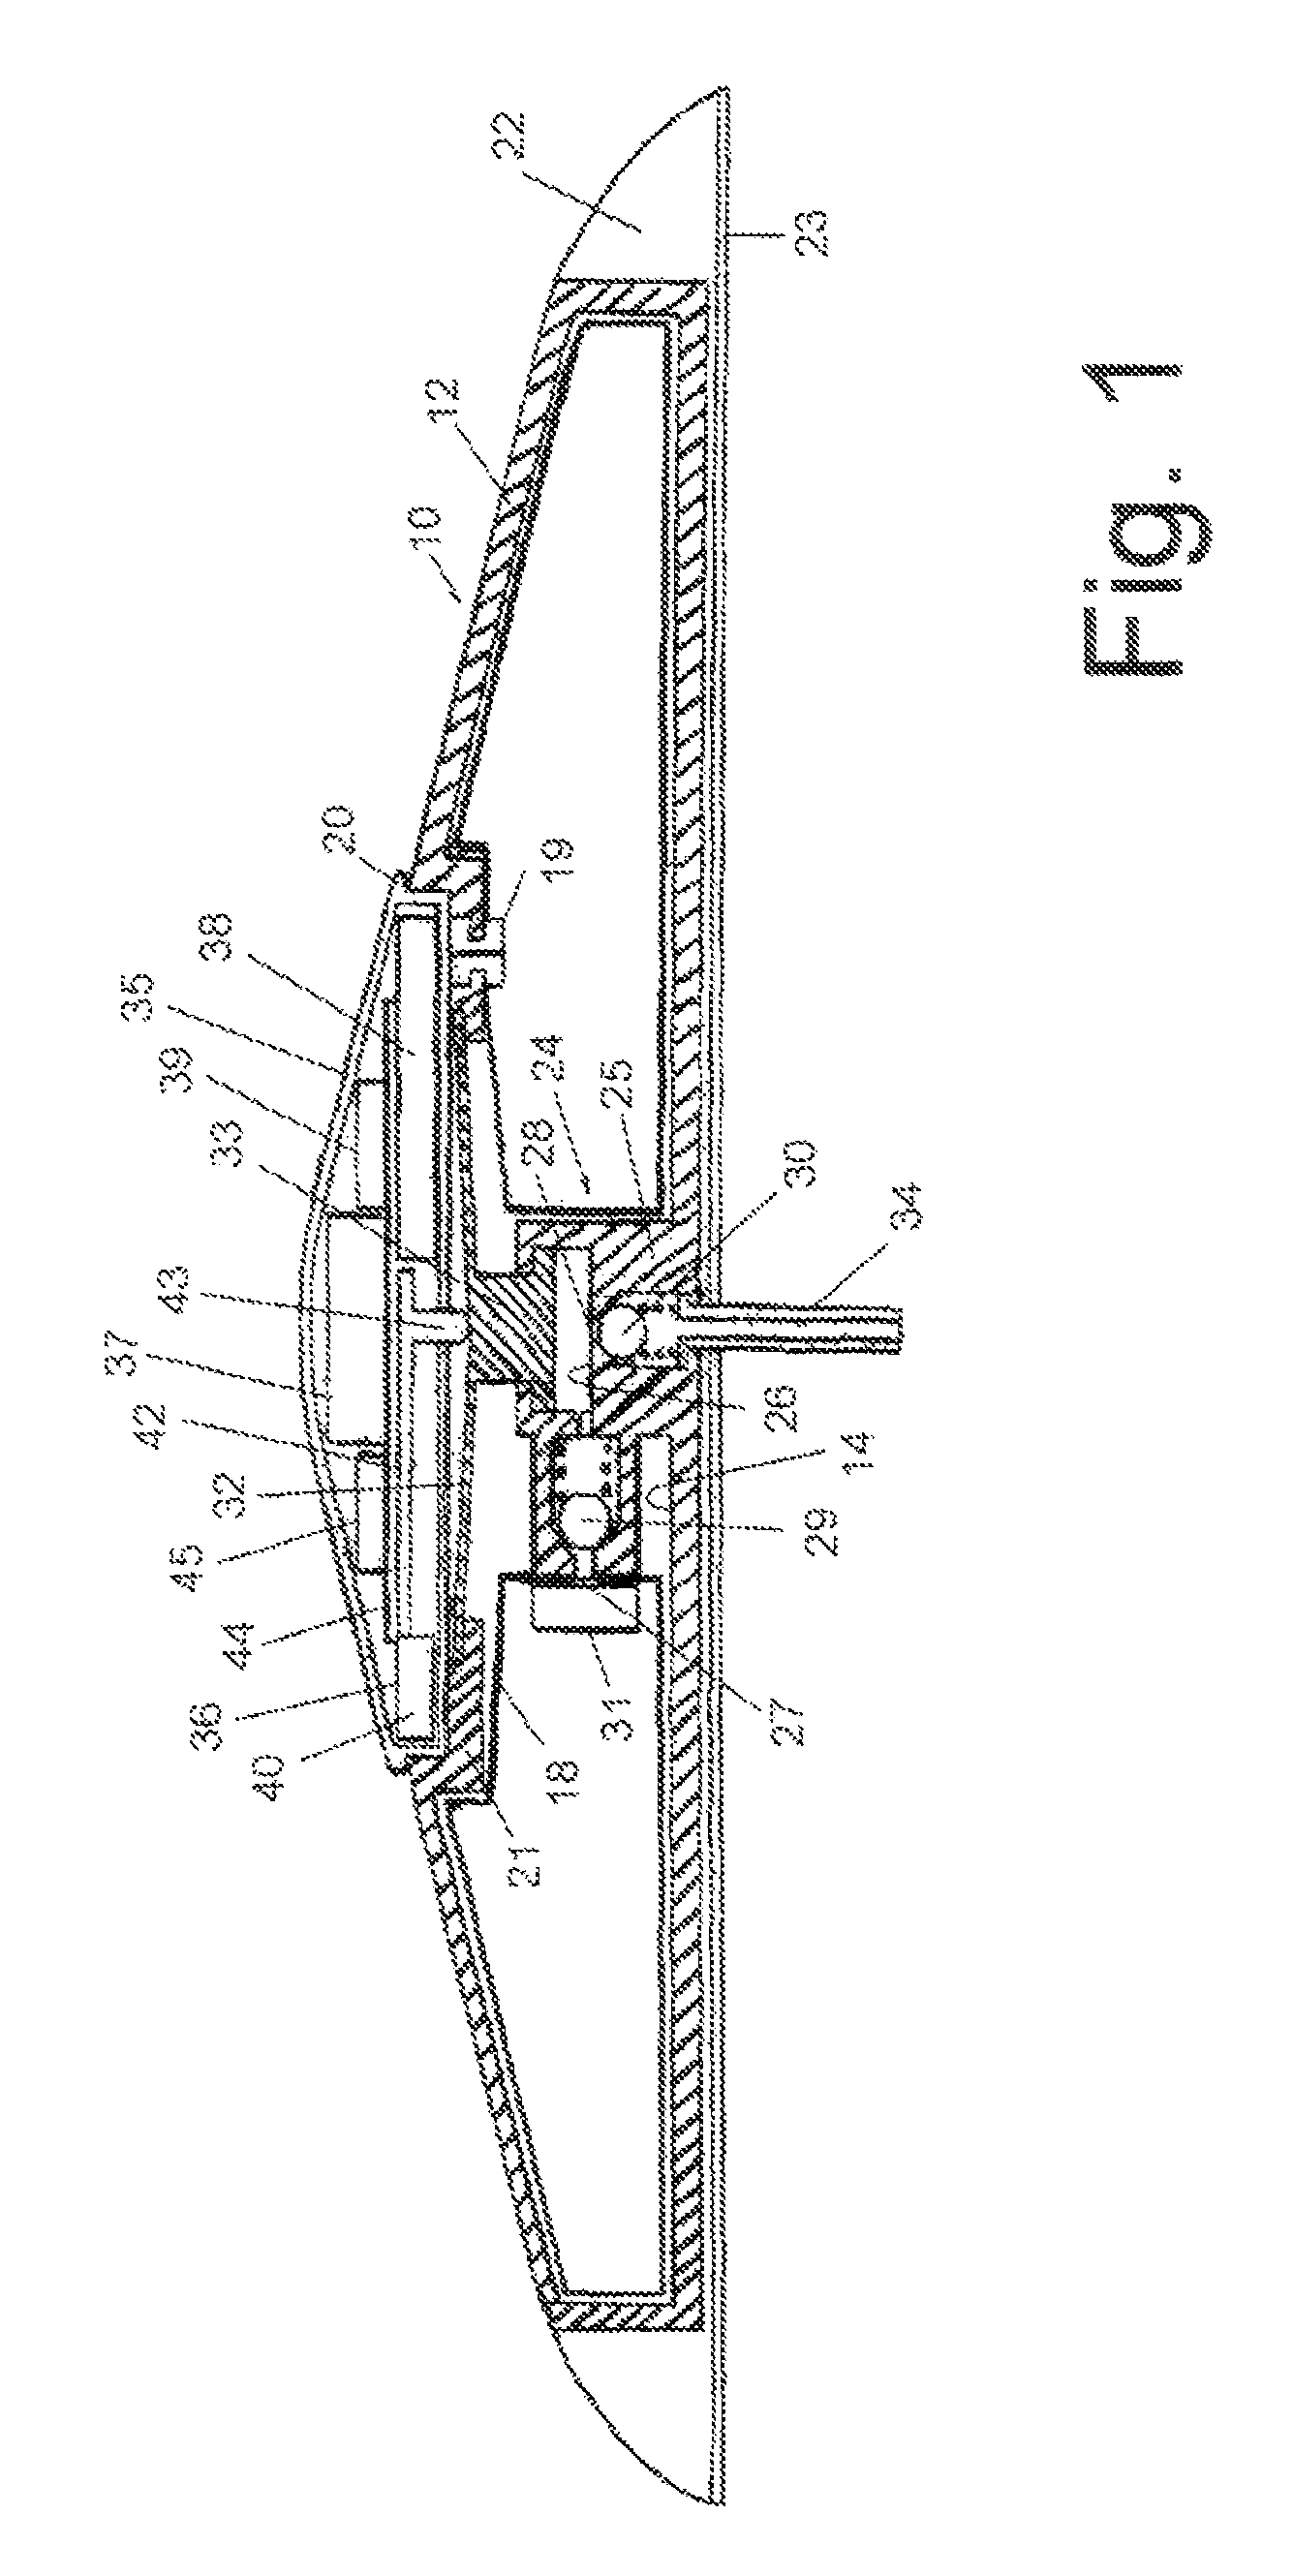 Method and apparatus for infusing liquid to a body